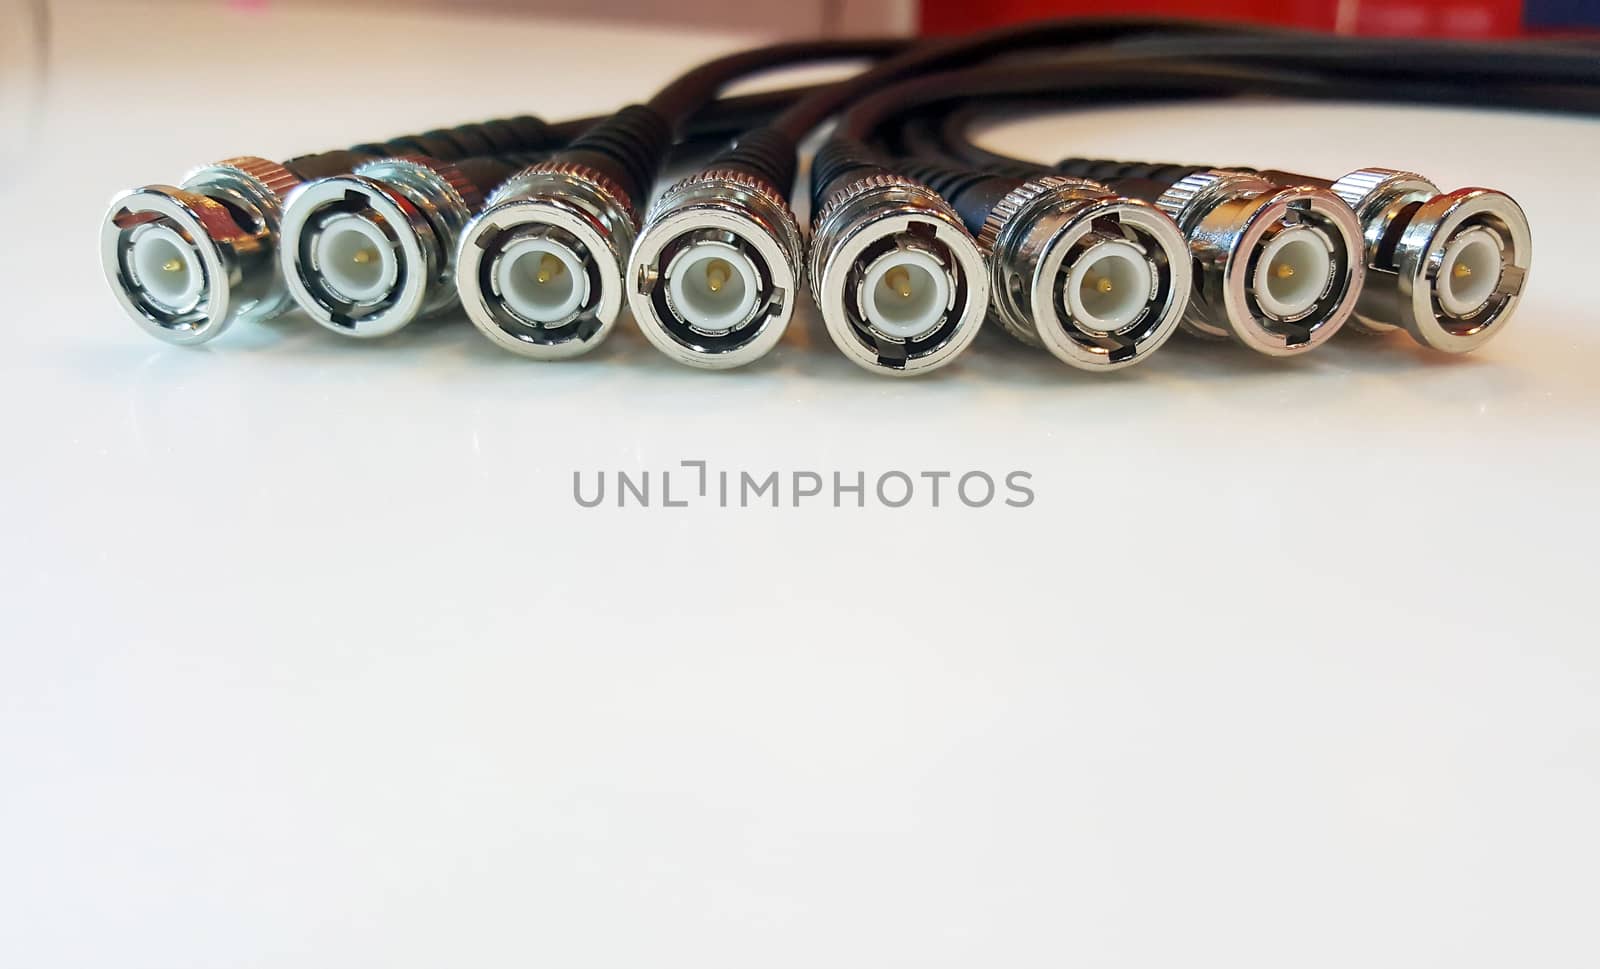 BNC connector for audio and video signals on white background.